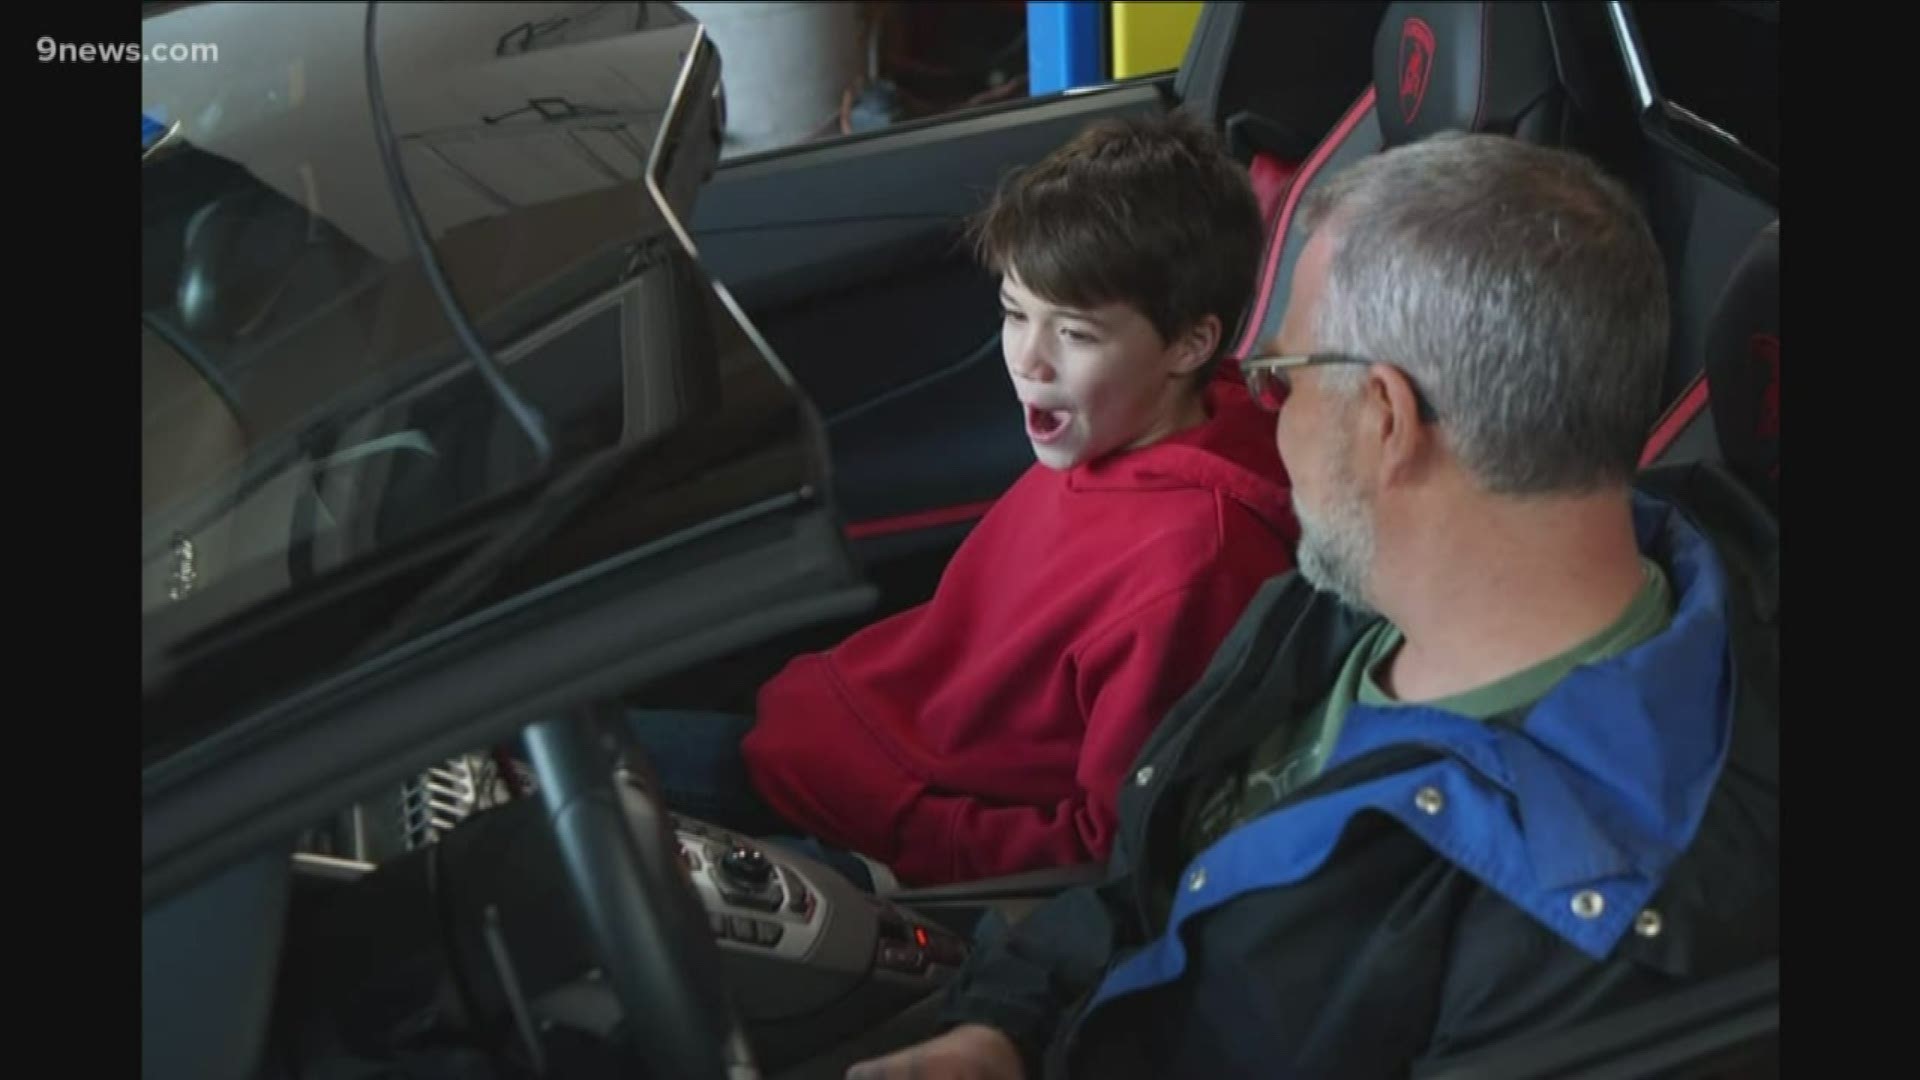 The Italian carmaker heard about the 3D replica and made the Backus family a part of their holiday commercial.